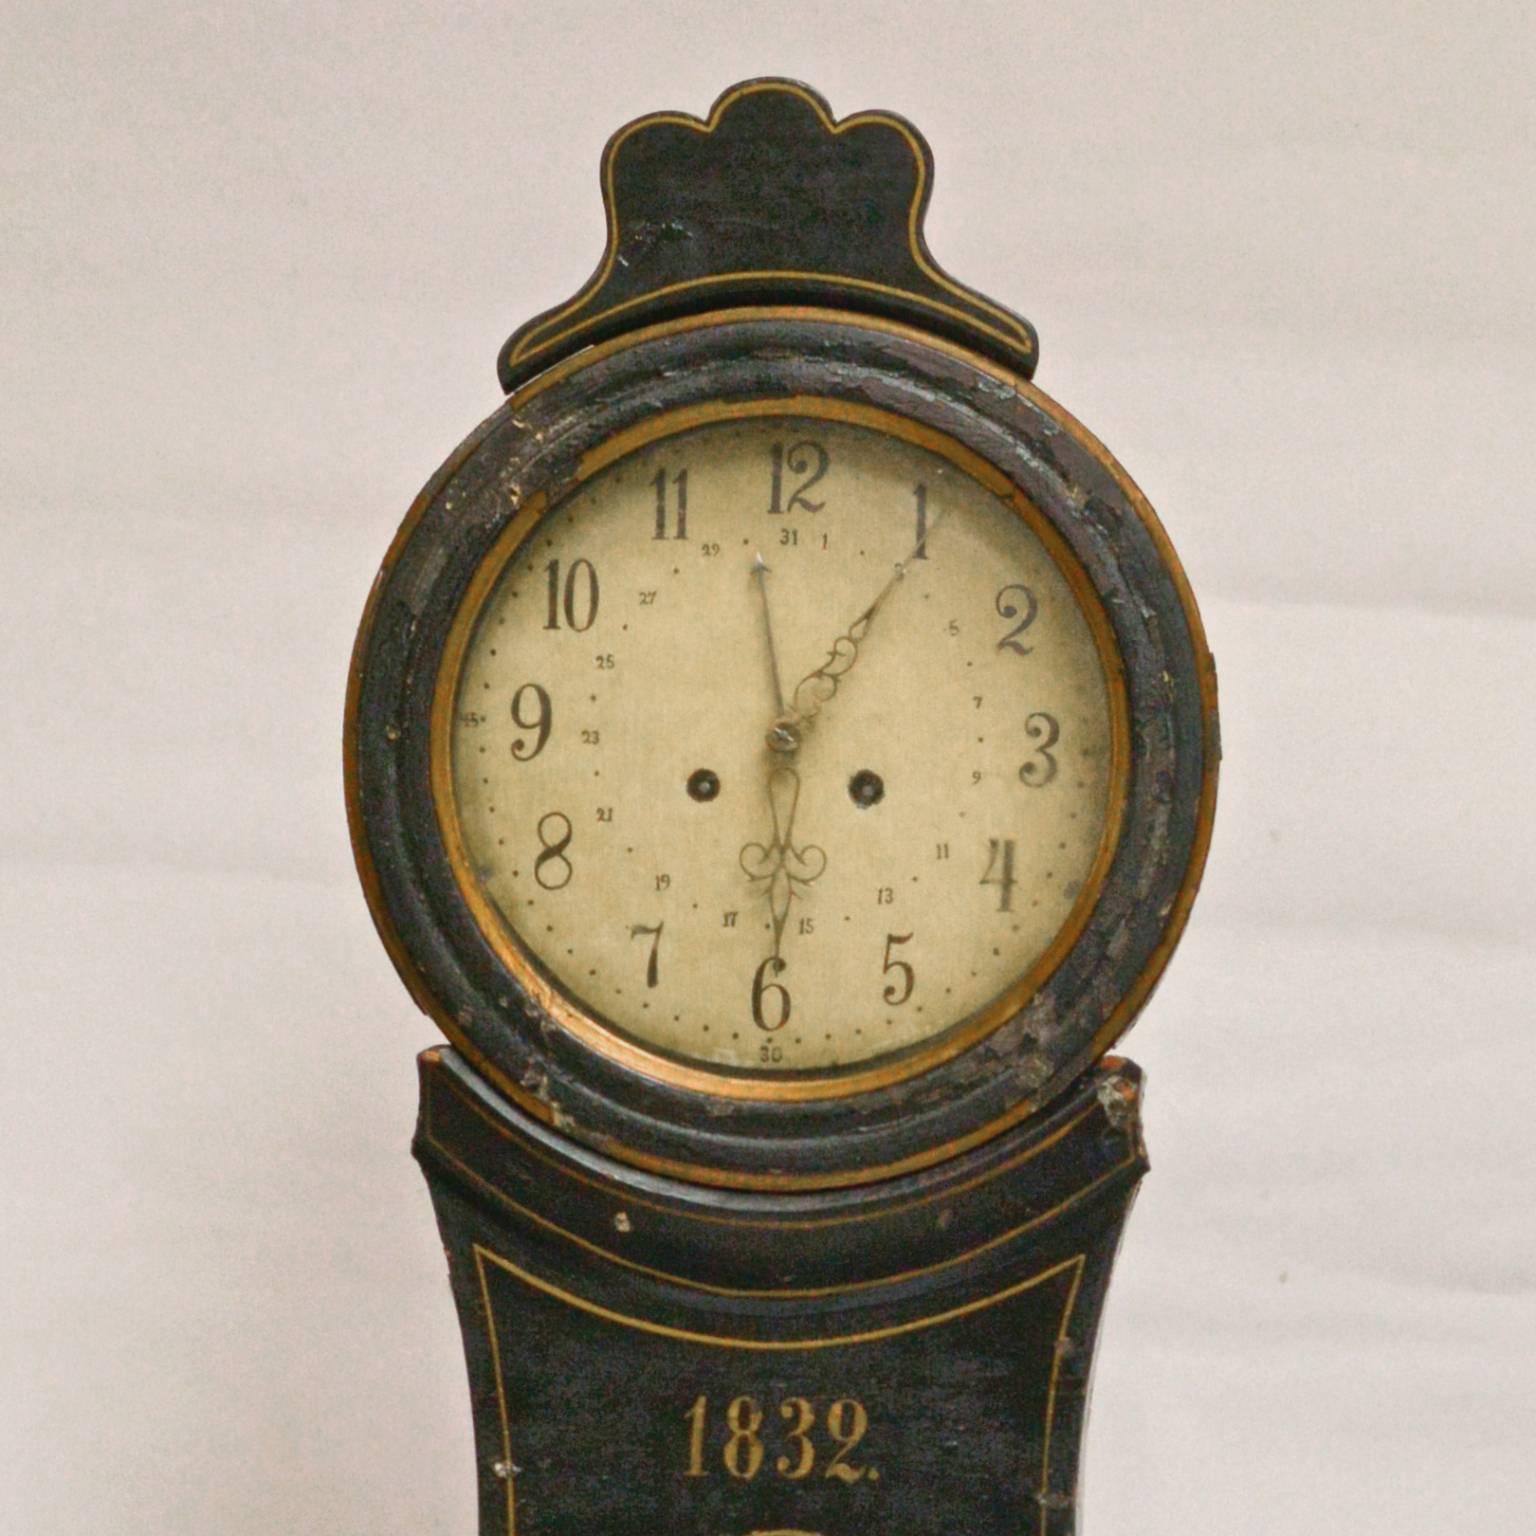 Unusual example of a decorative 1800s antique Swedish Mora clock with stunning hand-painted gold detailing to the body and plinth with t1832 painted date.

This original 1800s Mora clock has a beautiful face with a clean patina, and original black